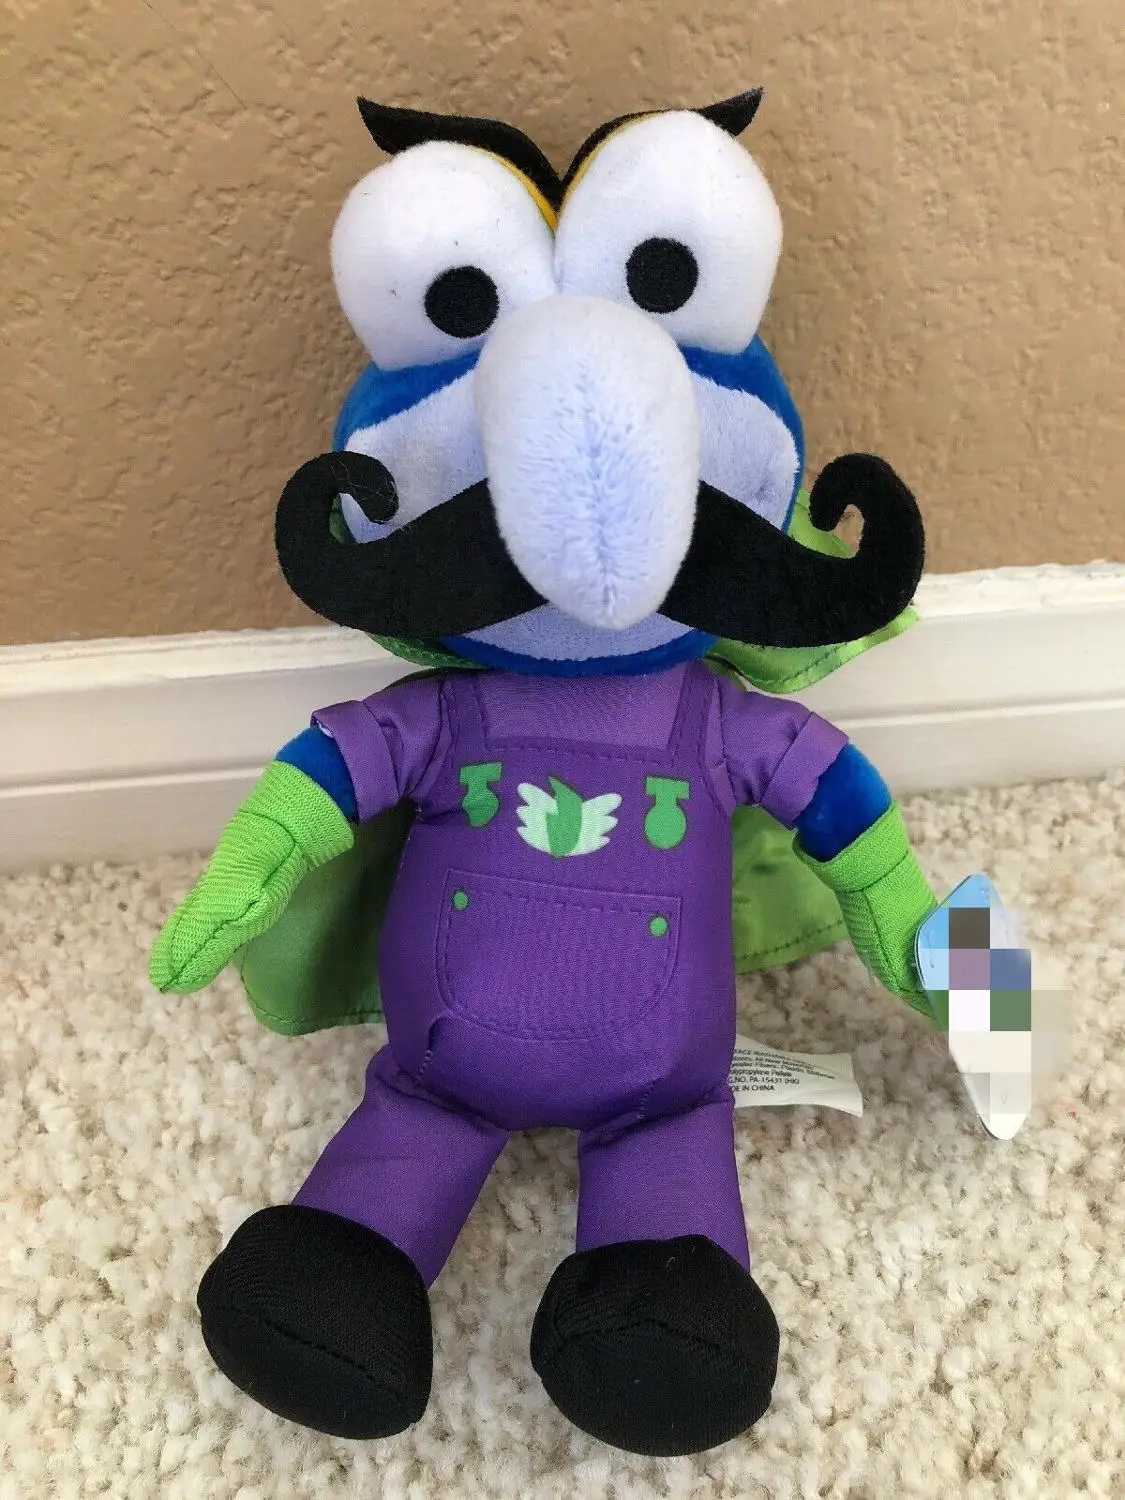 Meanzo Gonzo Plush Doll 8 Inch for sale online Disney Junior Muppet Babies Dr 